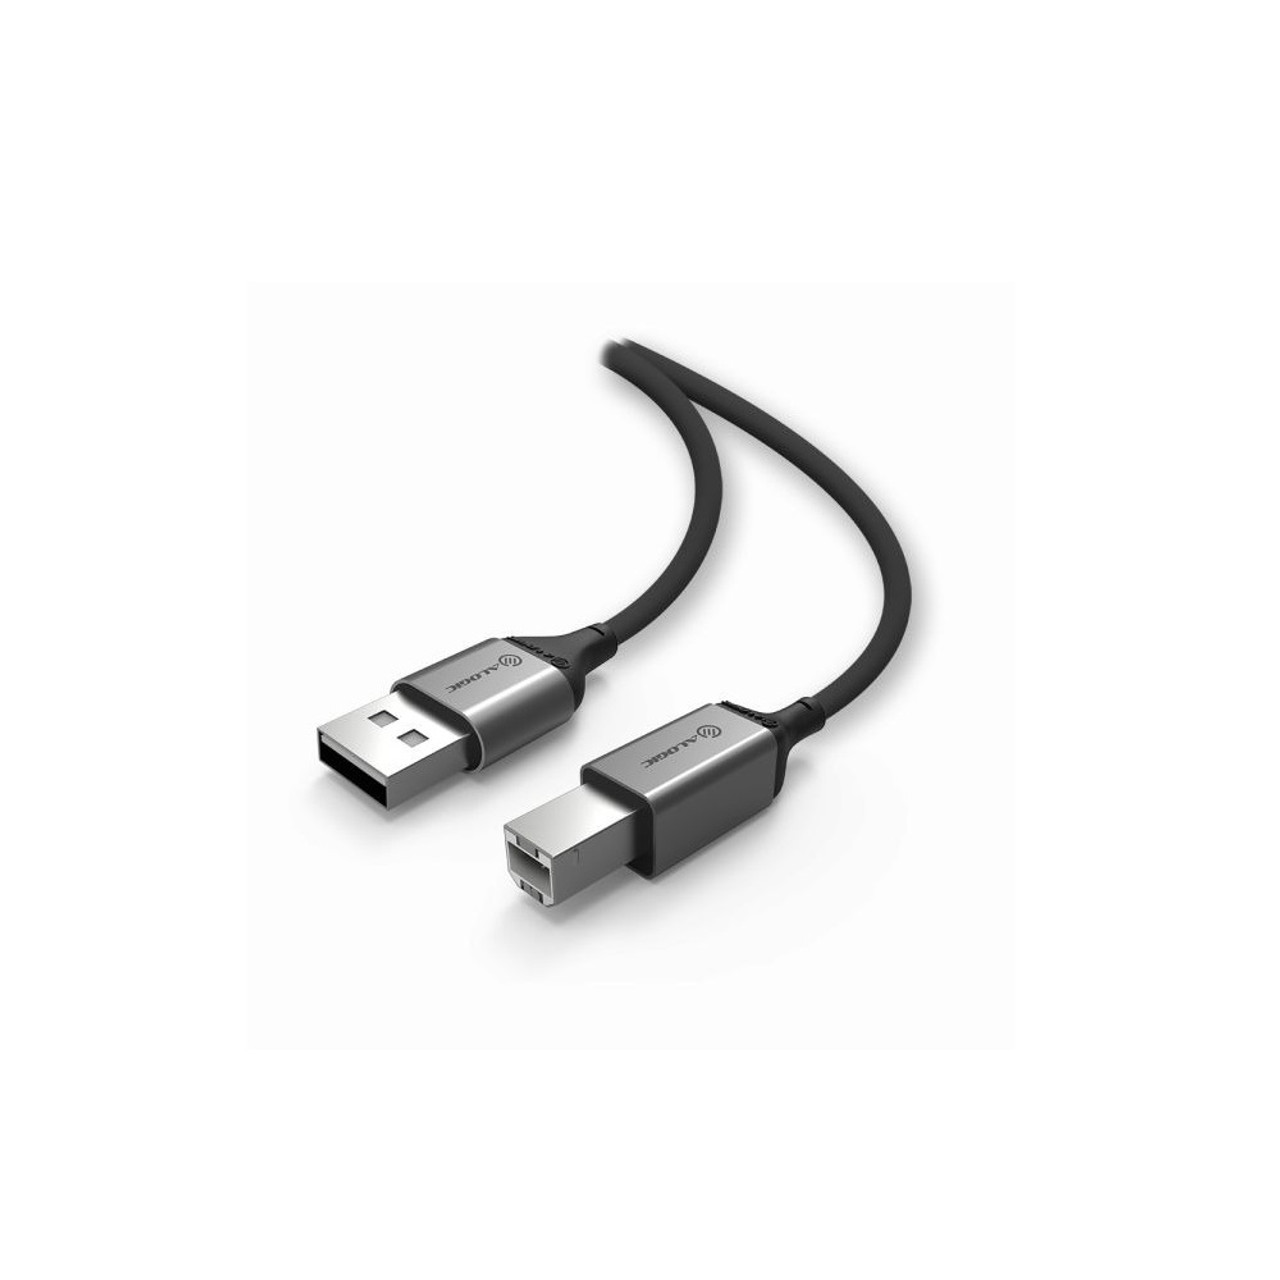 Alogic Usb A Male To Usb B Male Cable 1m 4918